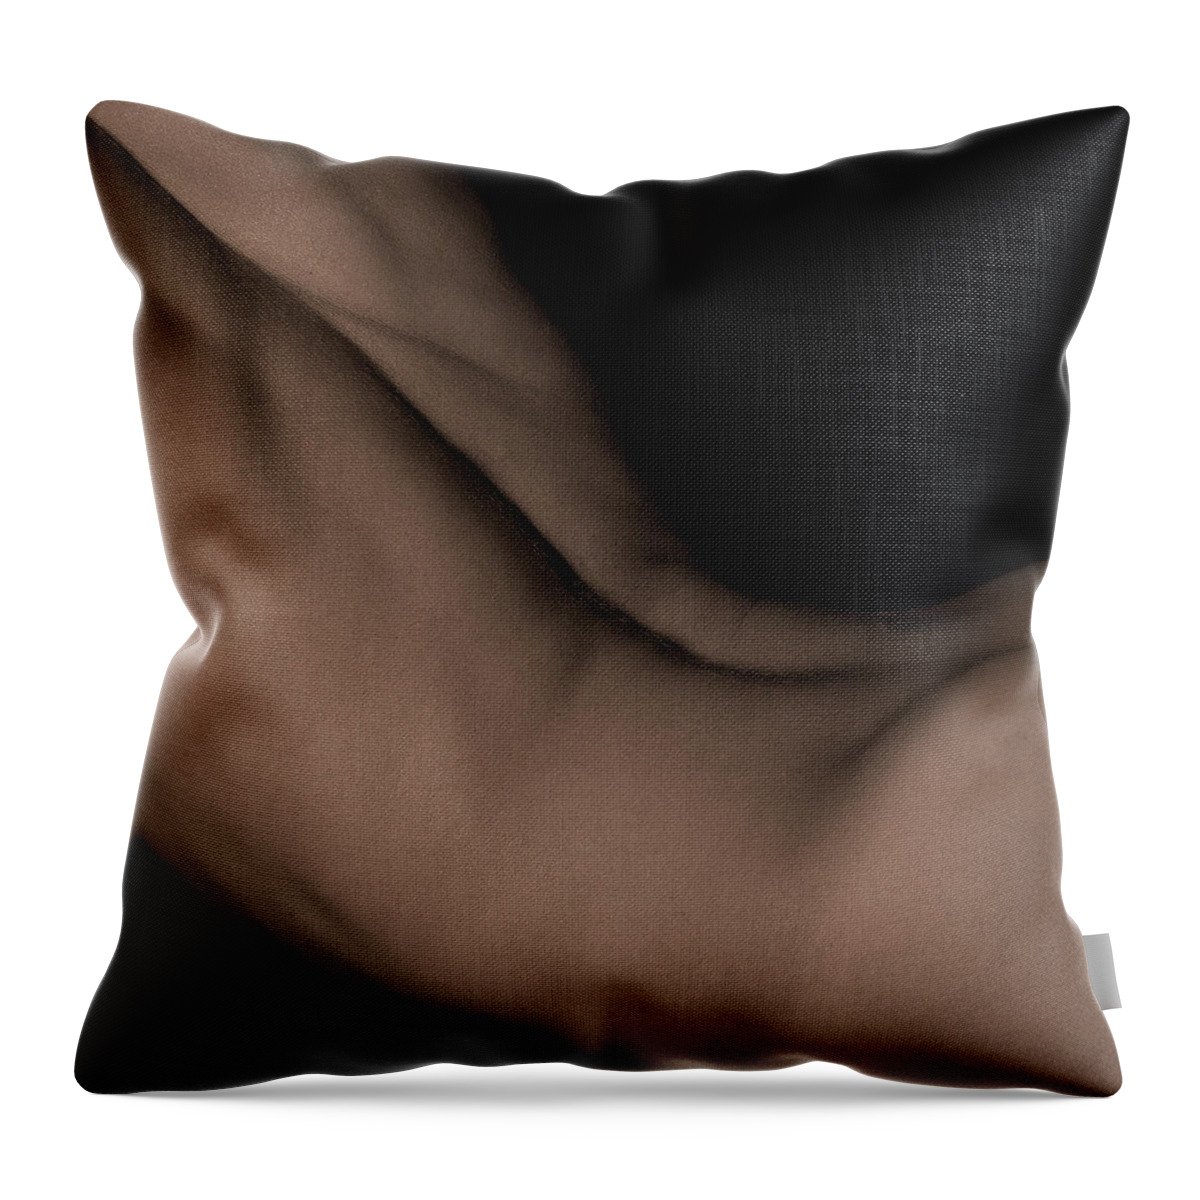 People Throw Pillow featuring the photograph Womans Body by Www.wm Artphoto.se